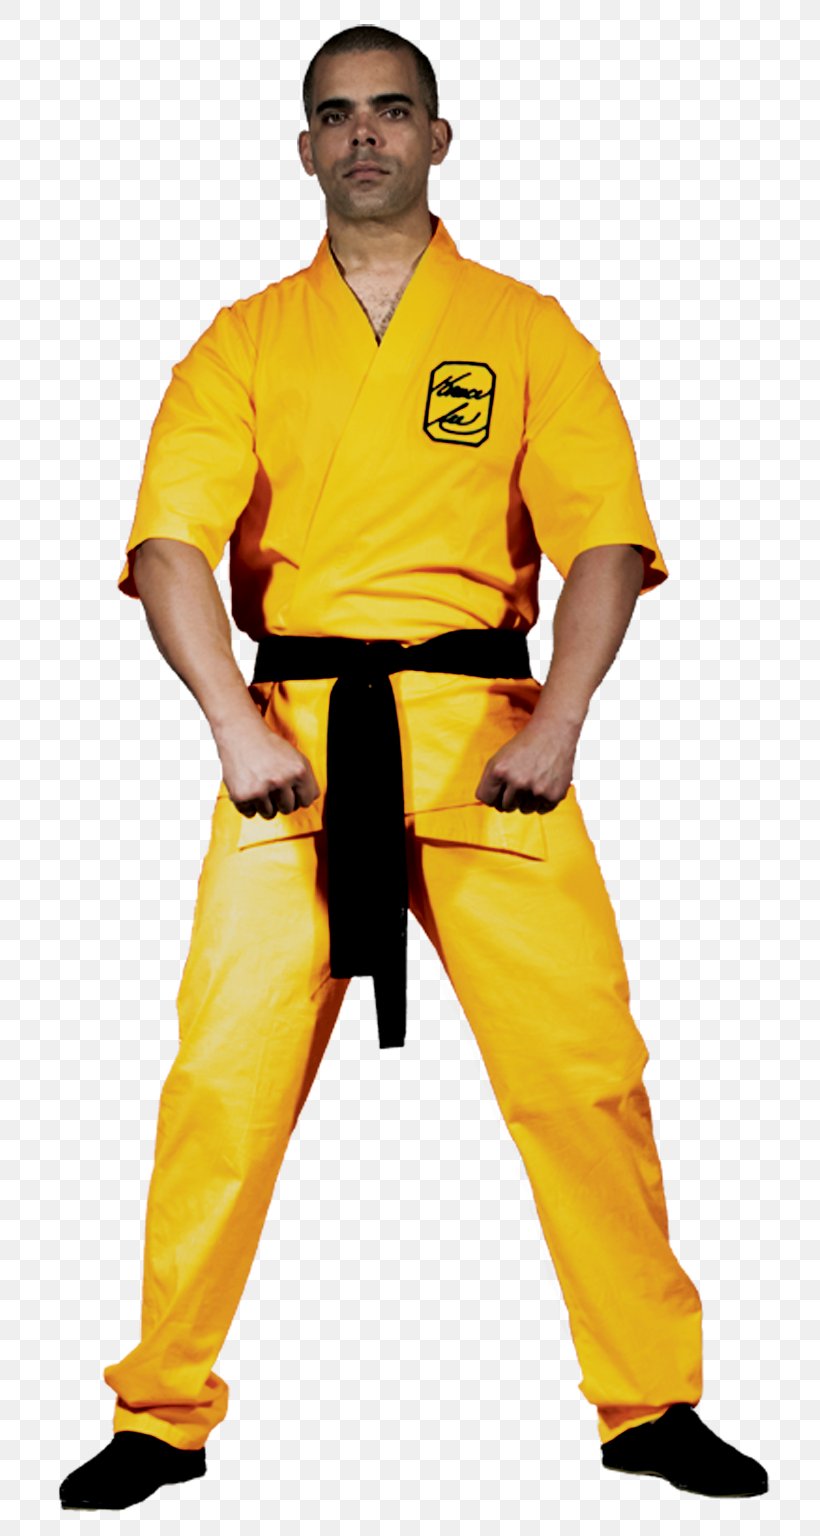 Bruce Lee Karate Gi Uniform Clothing Costume, PNG, 766x1536px, Bruce Lee, Chinese Martial Arts, Clothing, Clothing Accessories, Costume Download Free